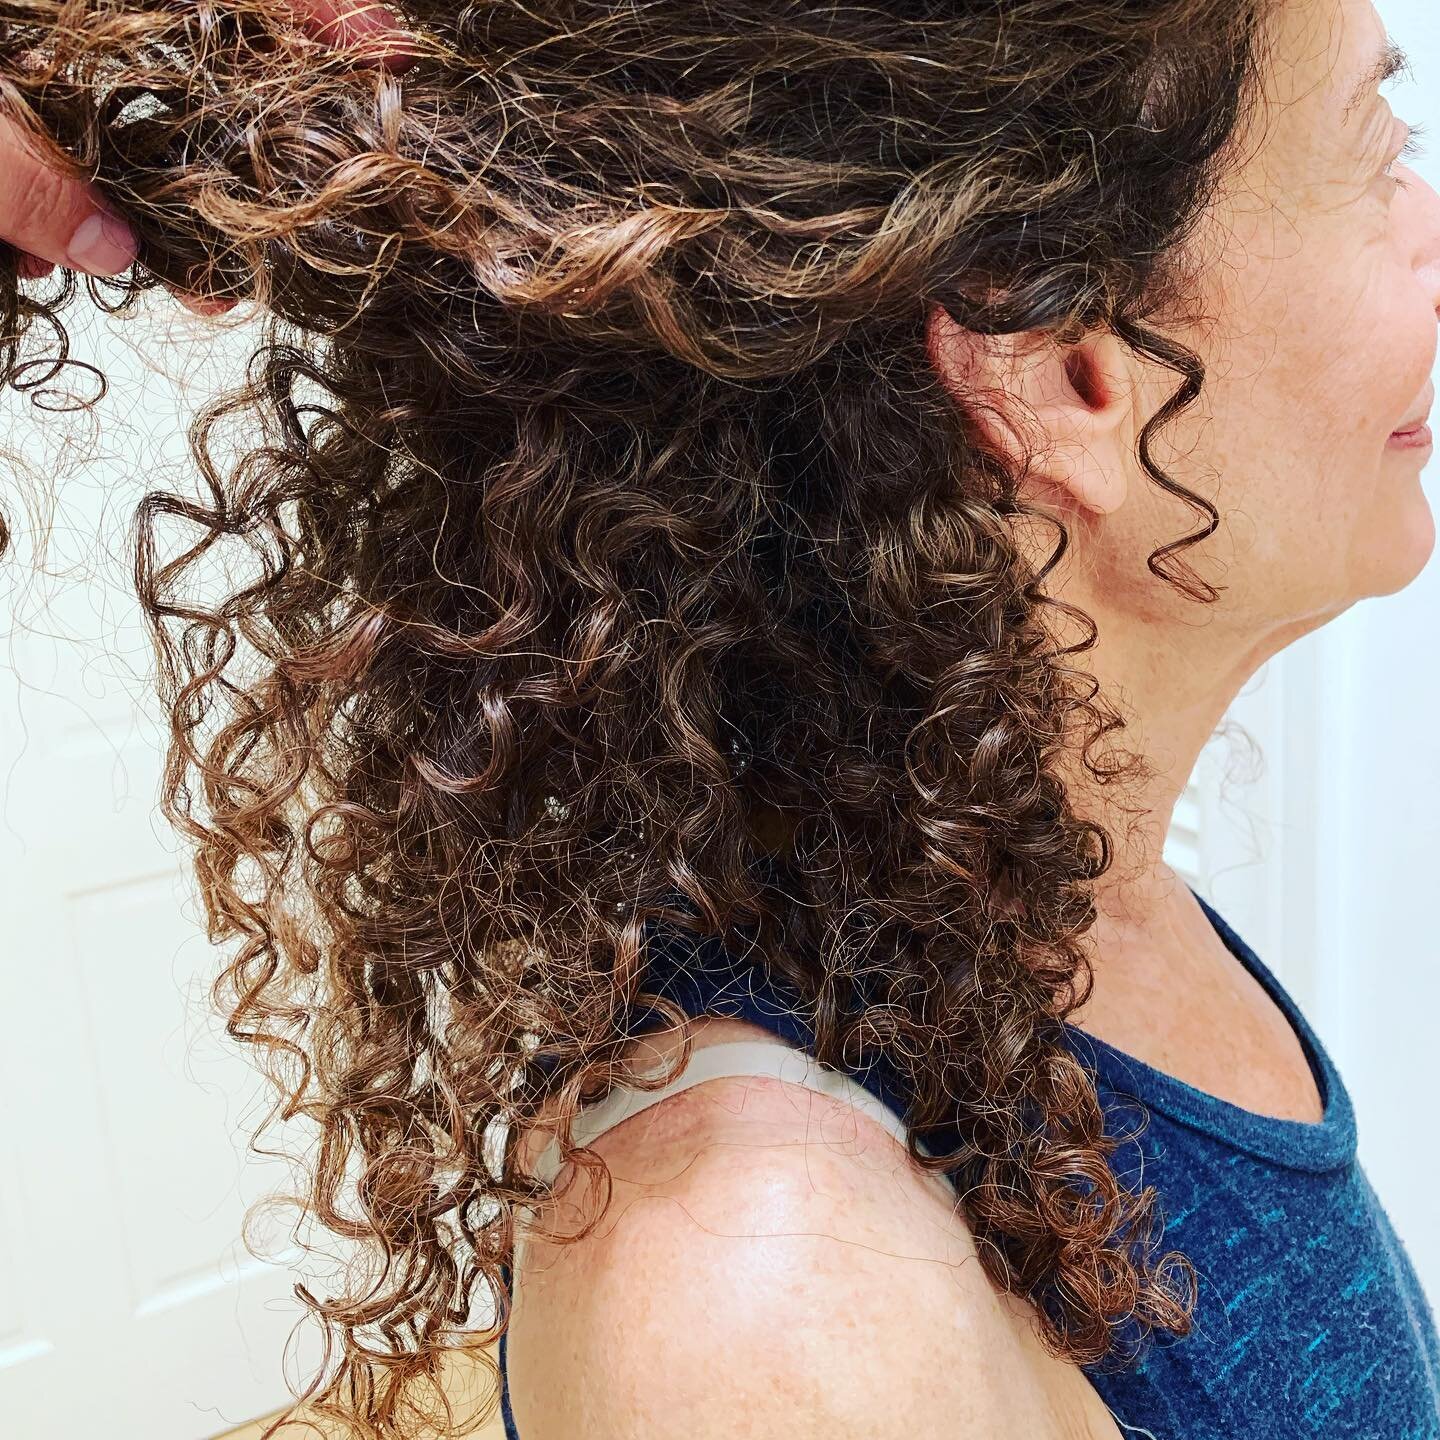 Trying to help my mom out with her VERY low porosity, high coarseness, low density 3b curls. After a lifetime of struggle, it&rsquo;s an upward battle! Top layer is super damaged but she has gorgeous ringlets underneath. I used @bouncecurl on her and